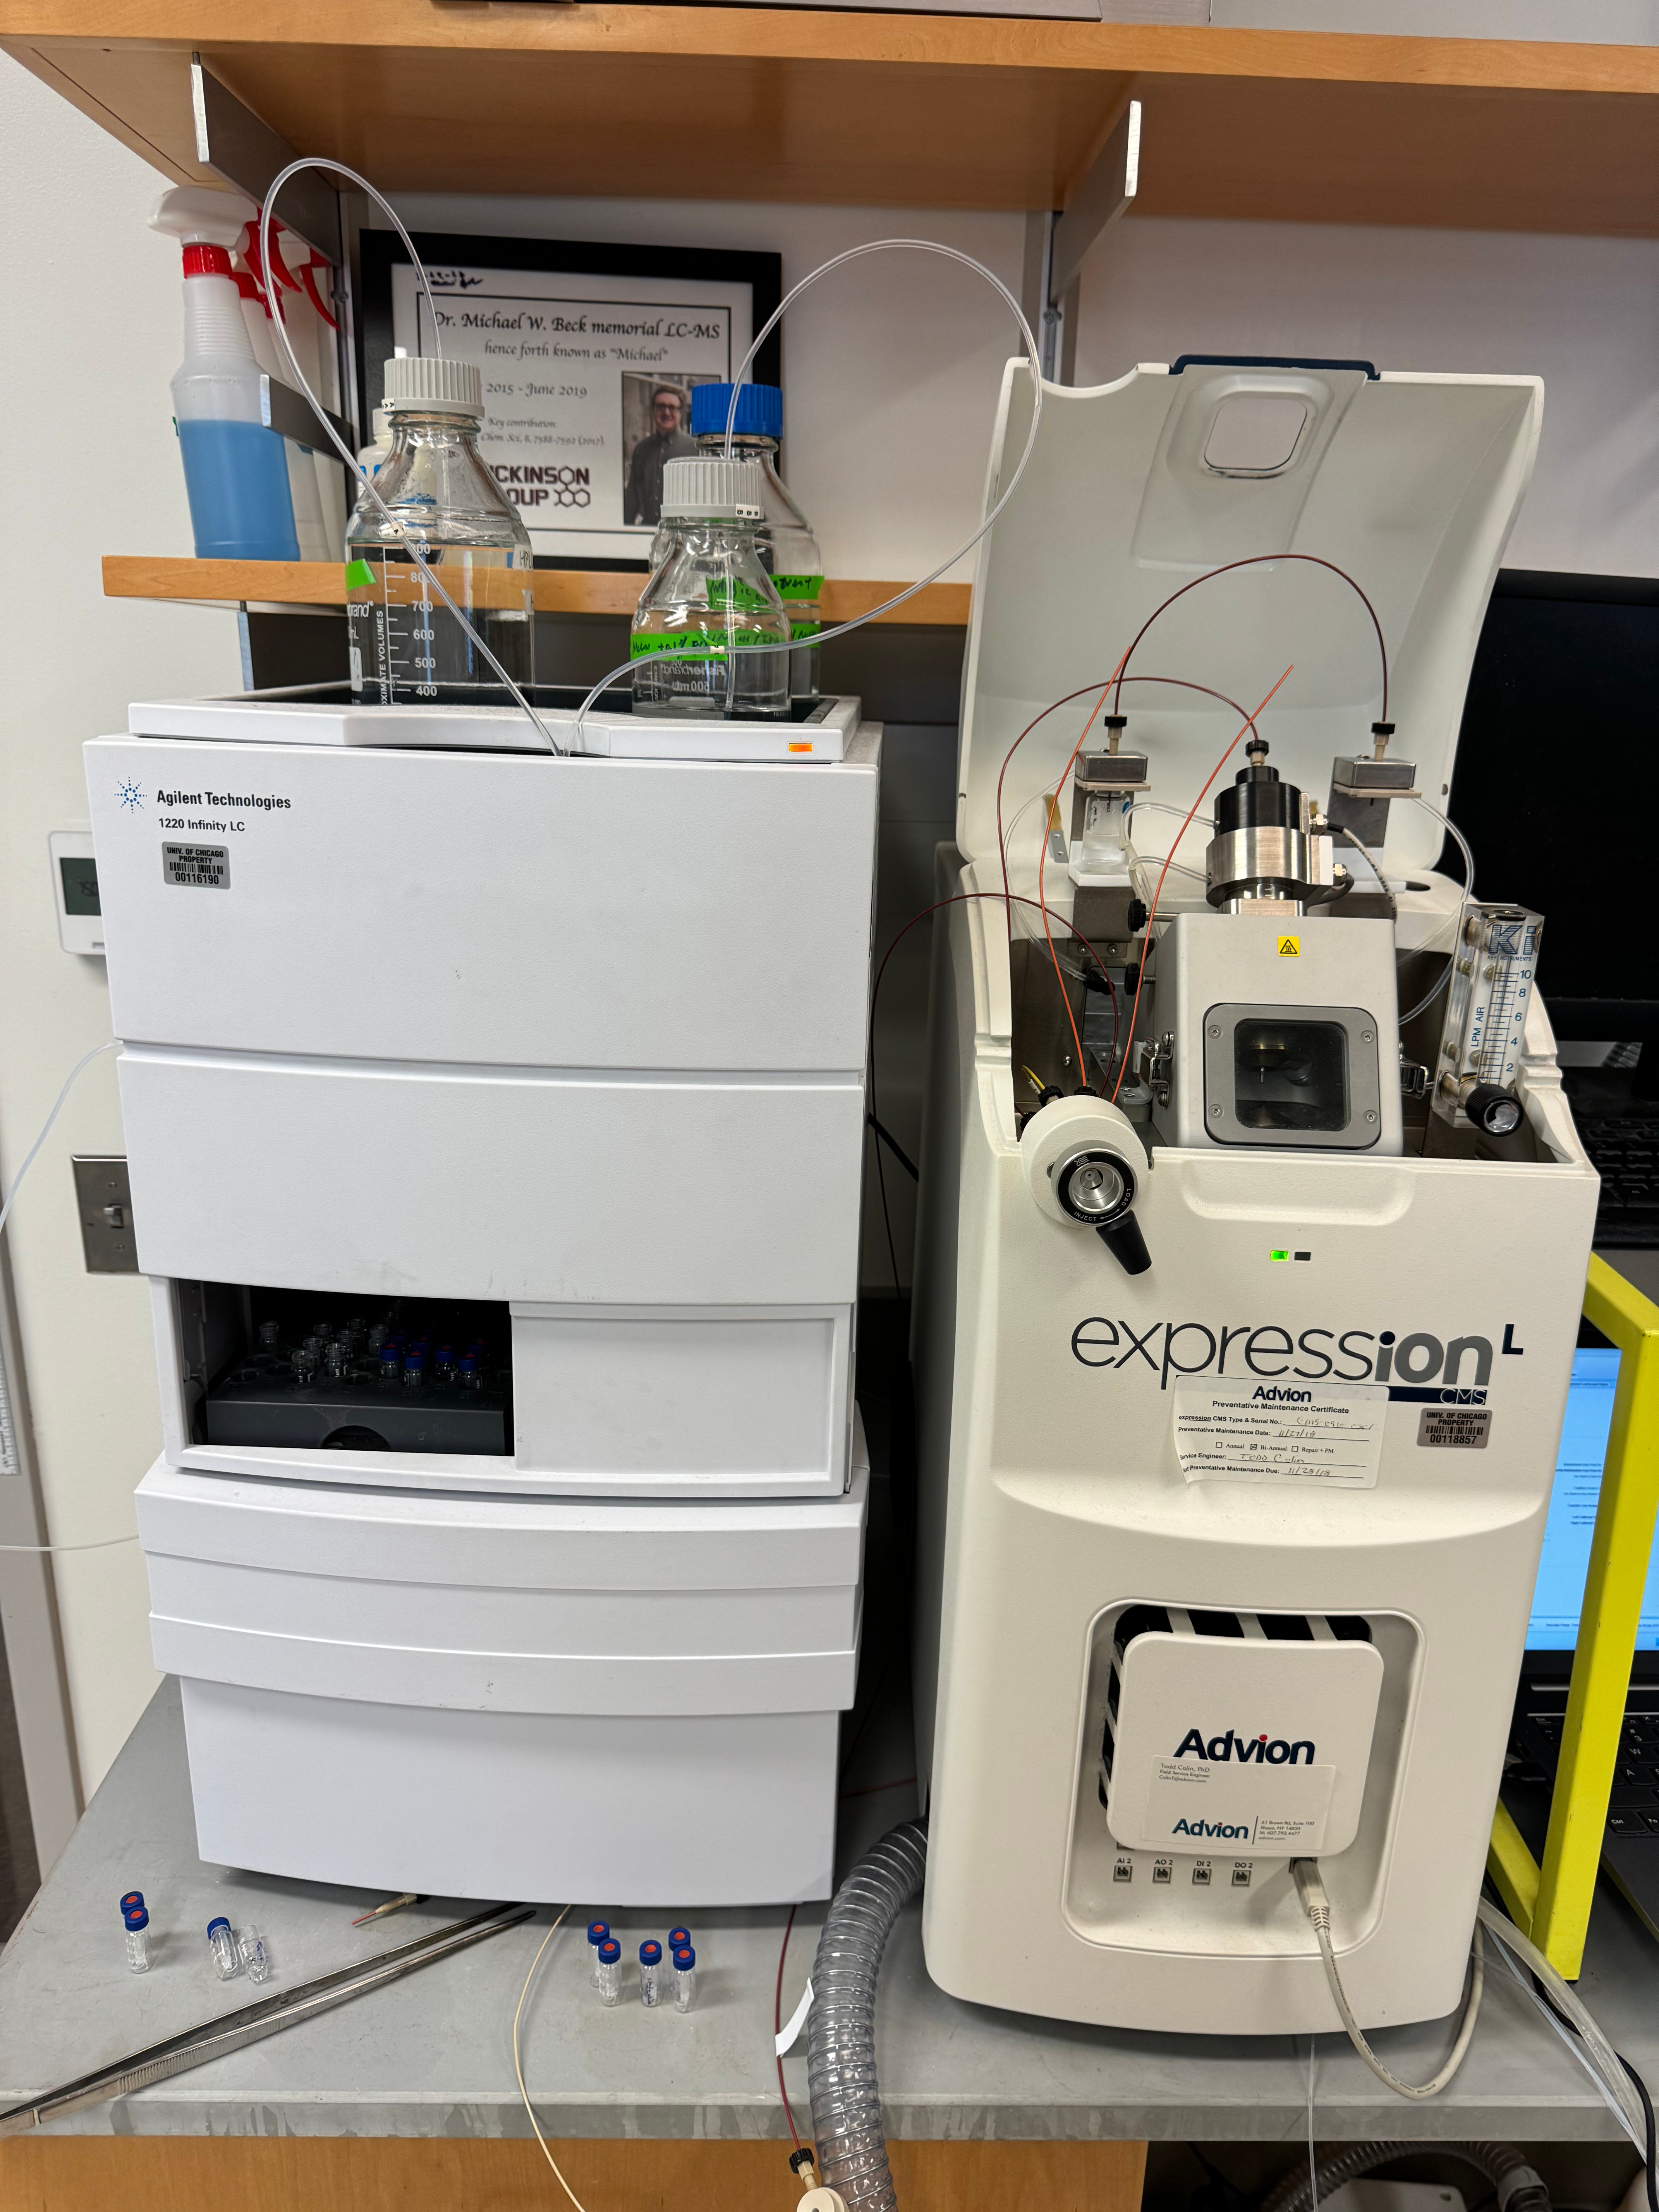 Complete LCMS: Advion expression-L mass spectrometer and Agilent 1220 LC